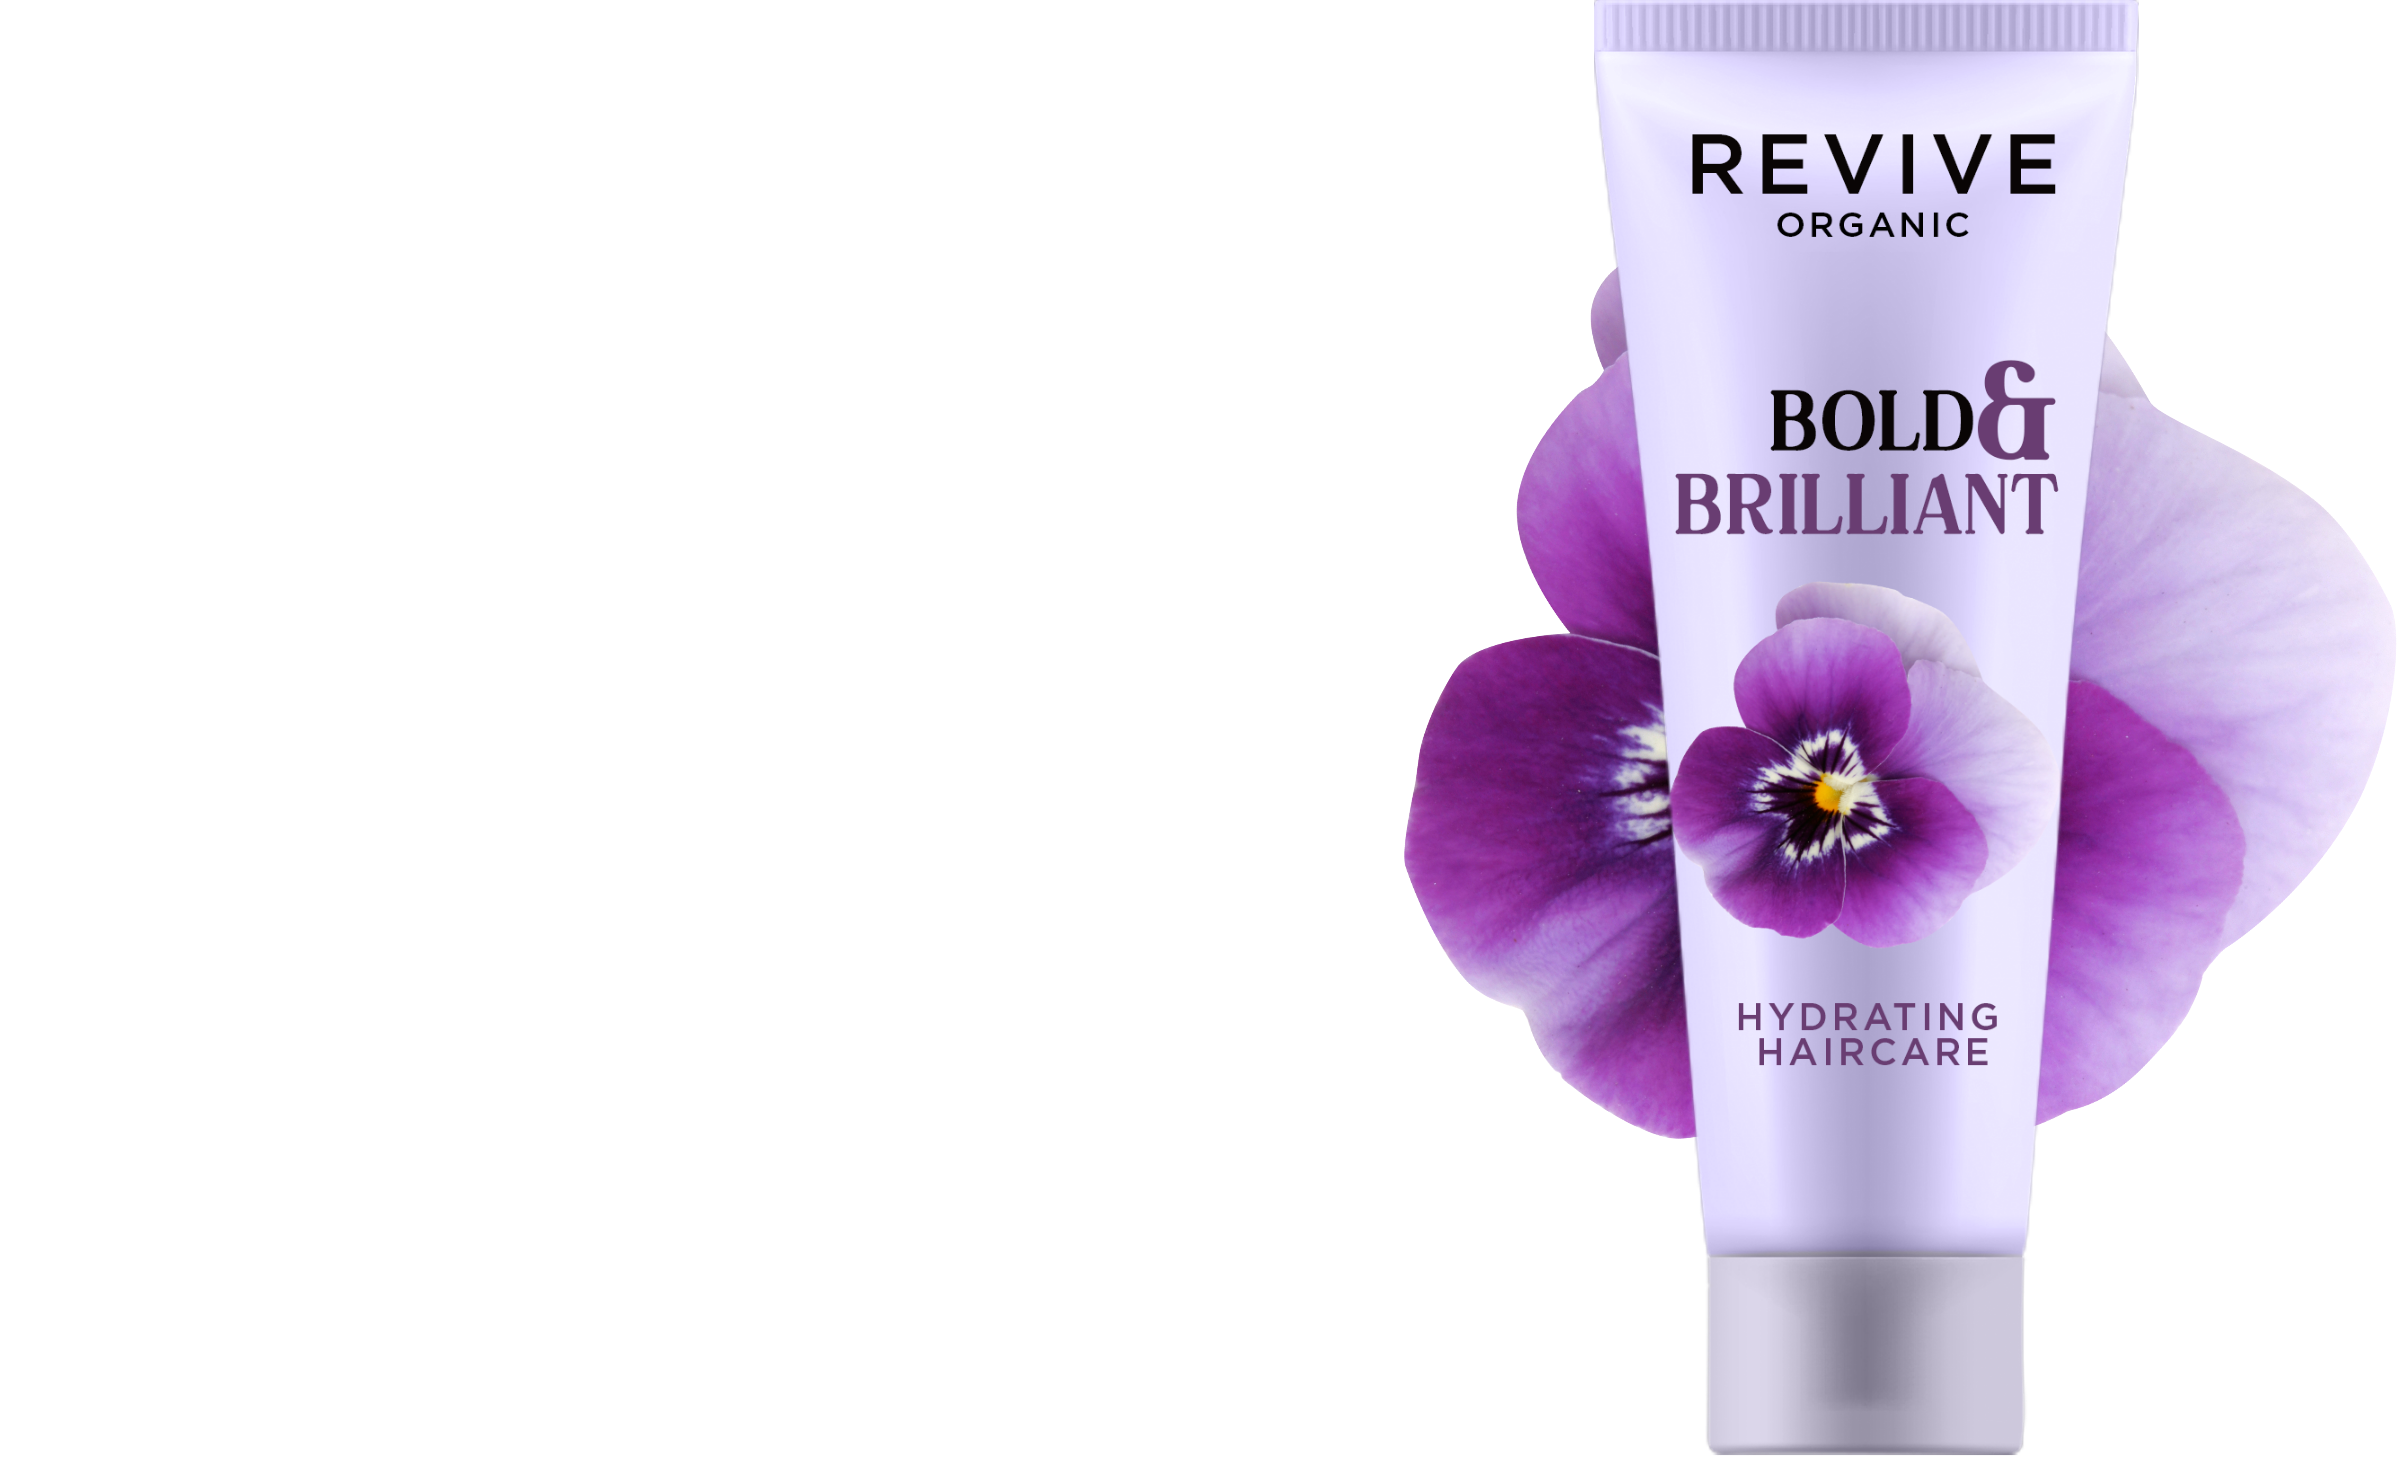 Bold & Brilliant
Haircare Build and Optimize your own ad below